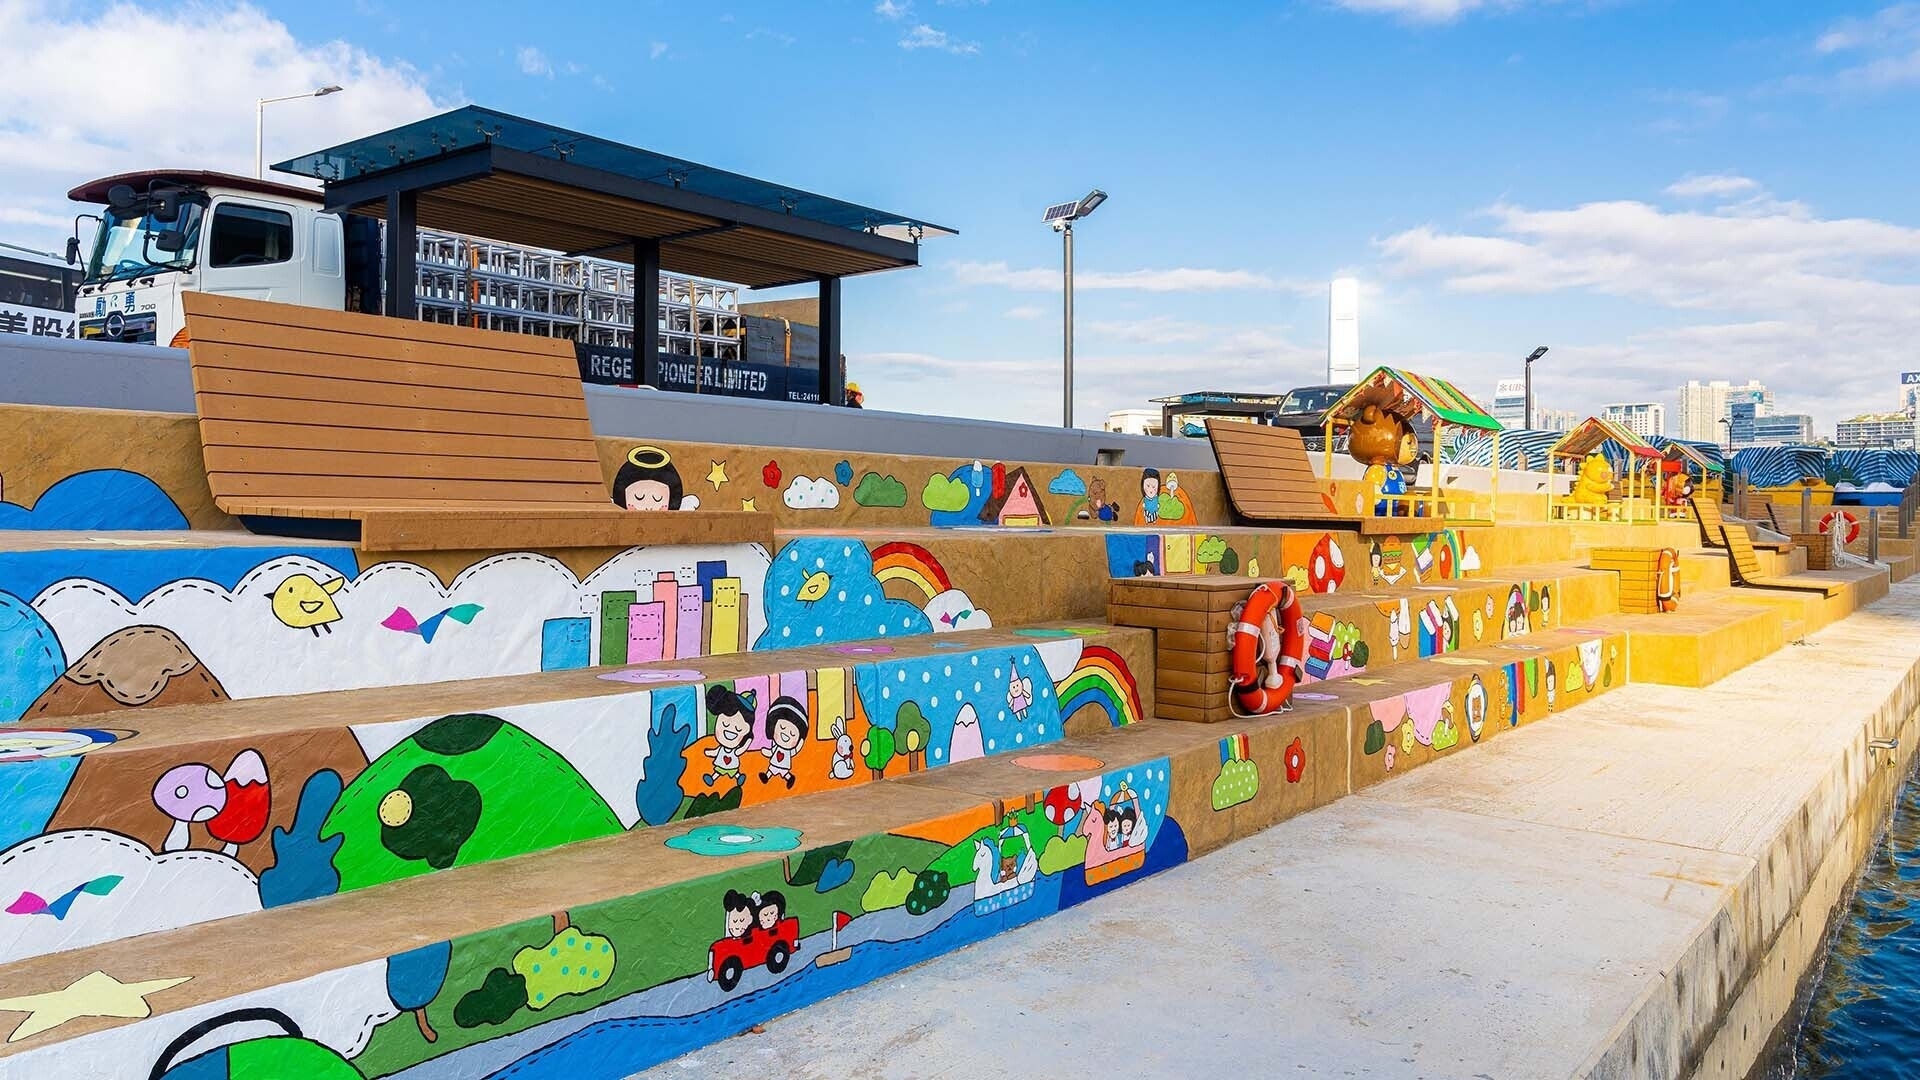 A seaside boardwalk featuring steps painted with colorful, child-friendly illustrations and a small, roofed boat in the background